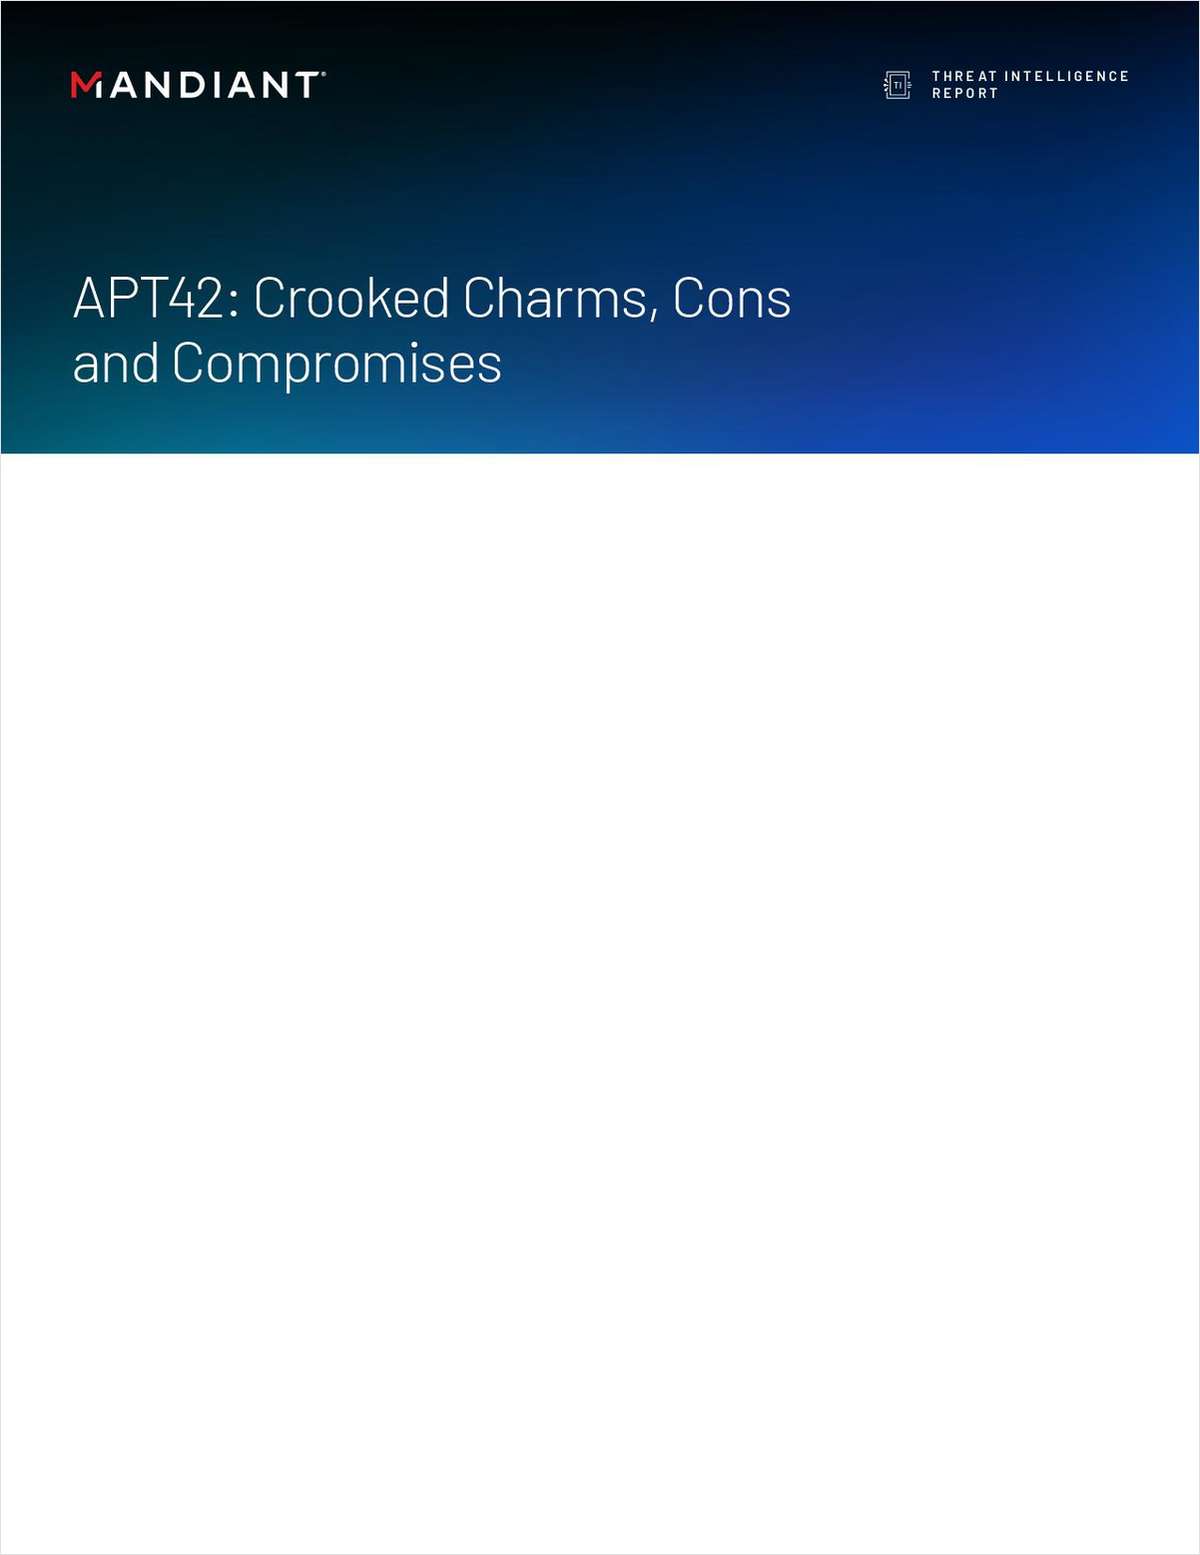 APT42: Crooked Charms, Cons and Compromises